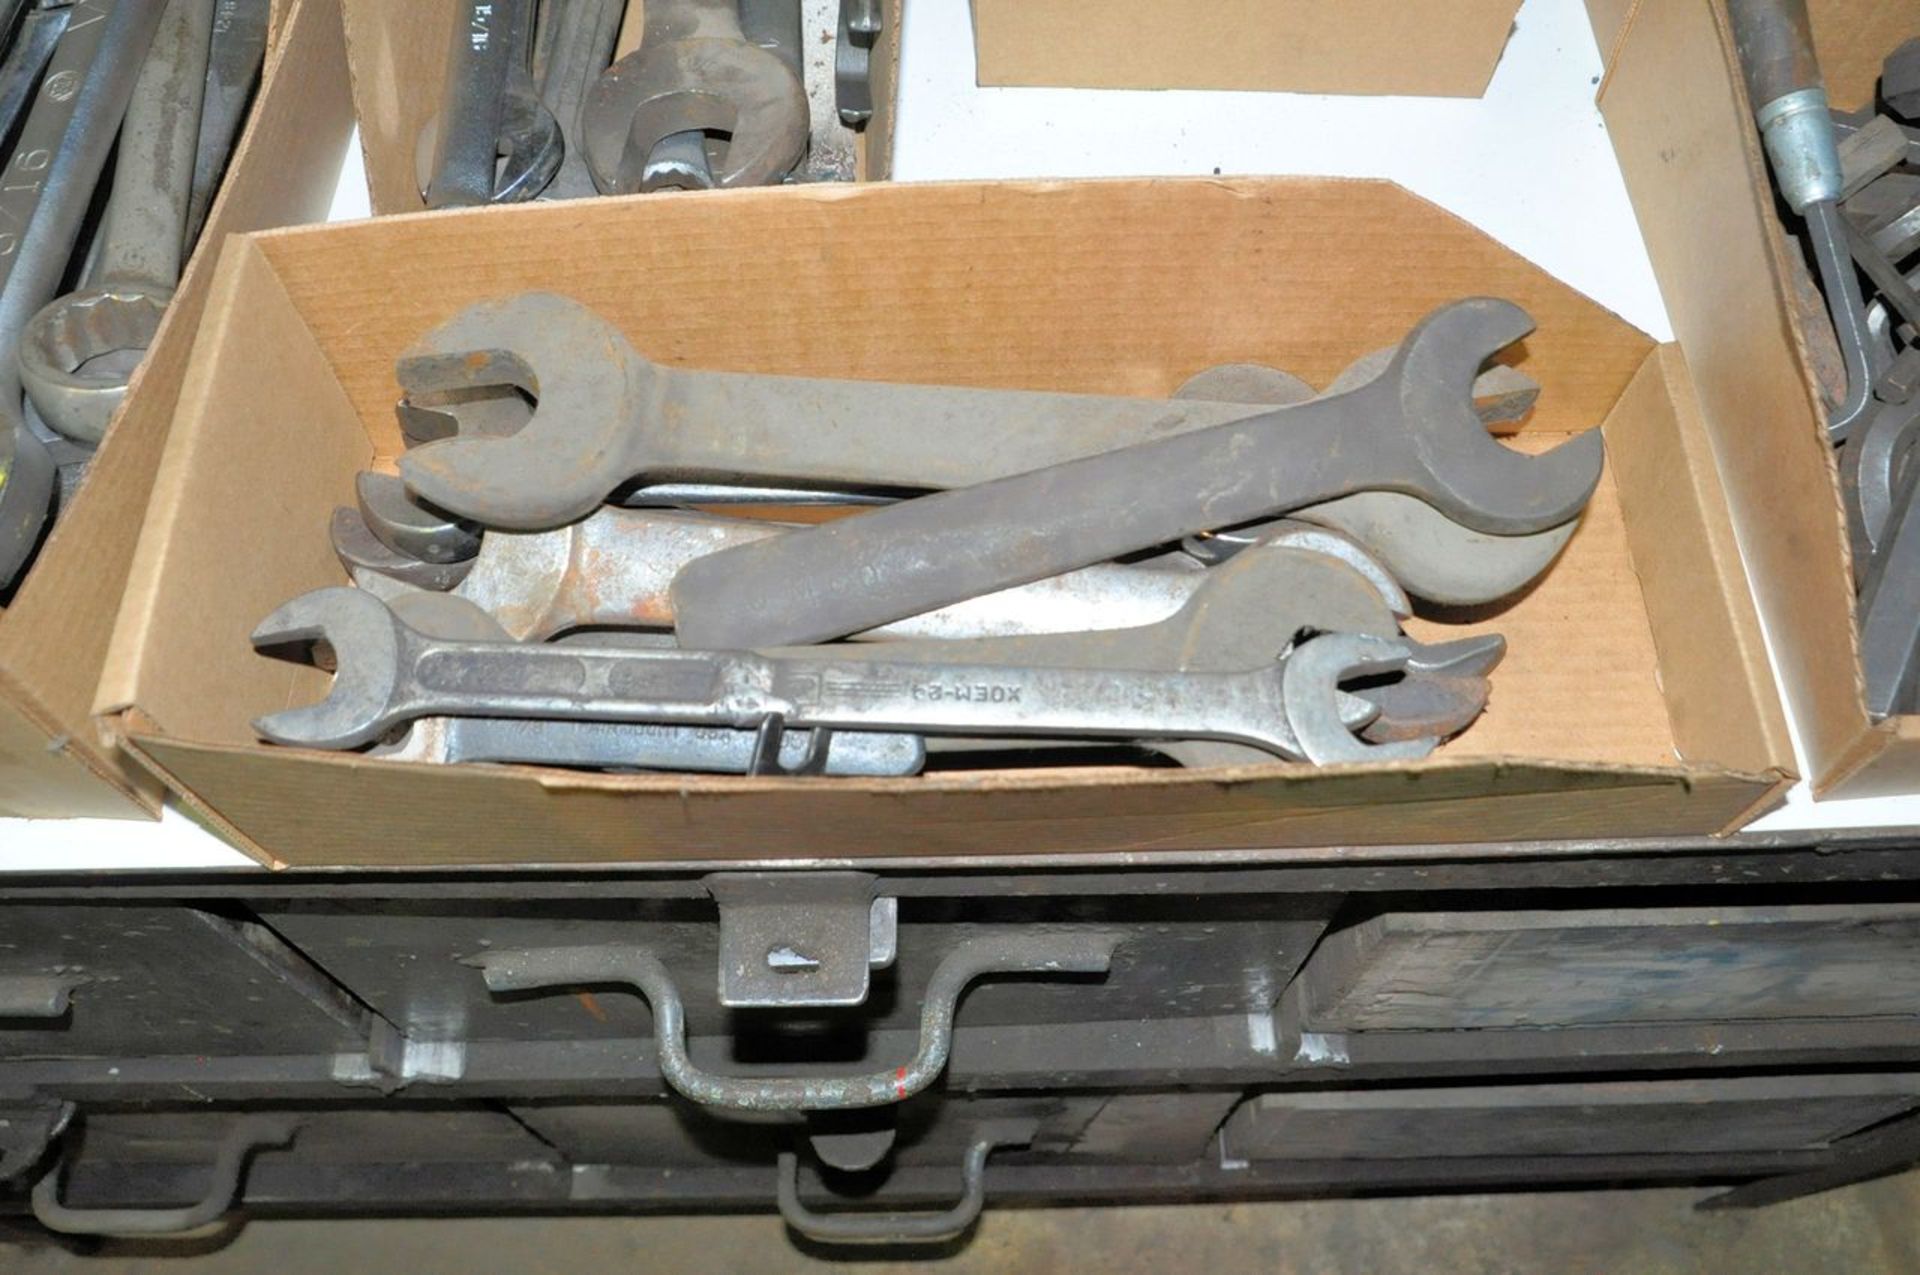 Lot - Mechanic's Wrenches in (5) Boxes, (Machine Shop) - Image 3 of 4